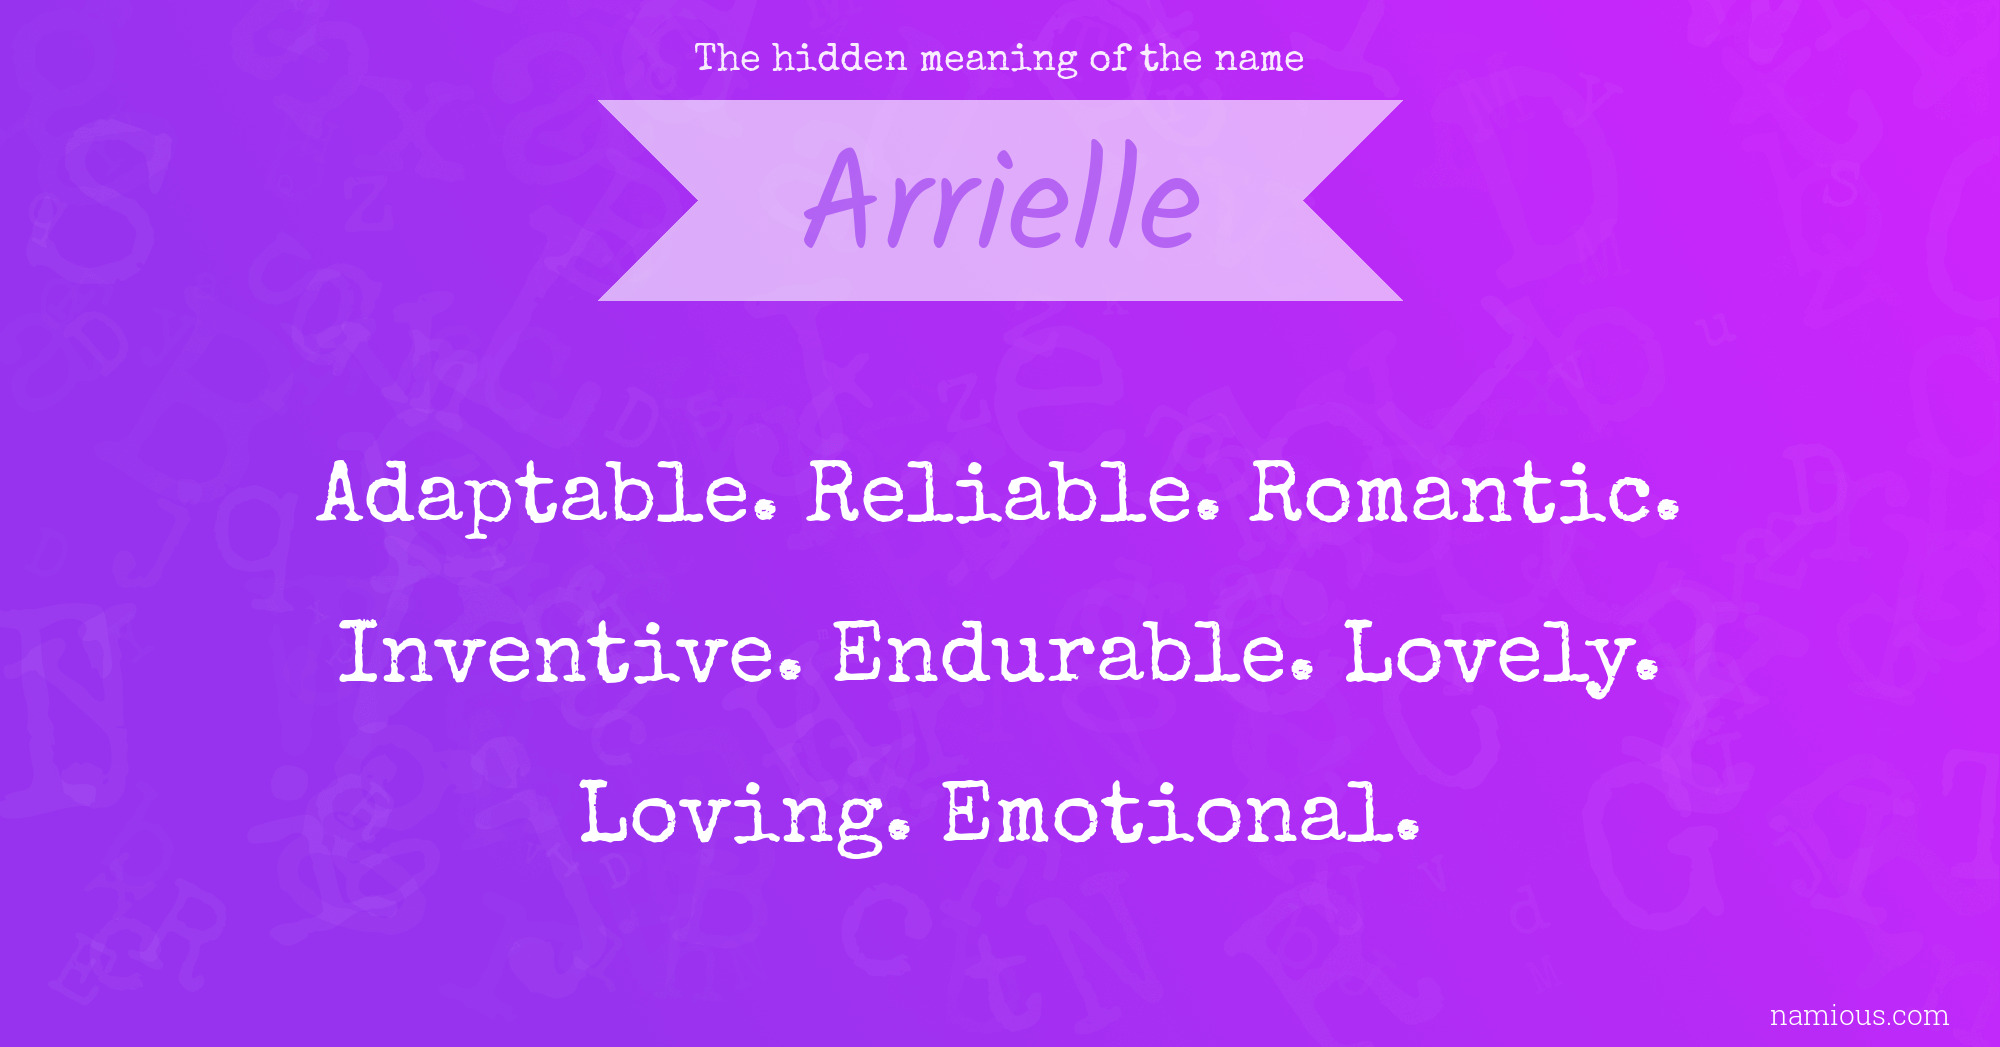 The hidden meaning of the name Arrielle